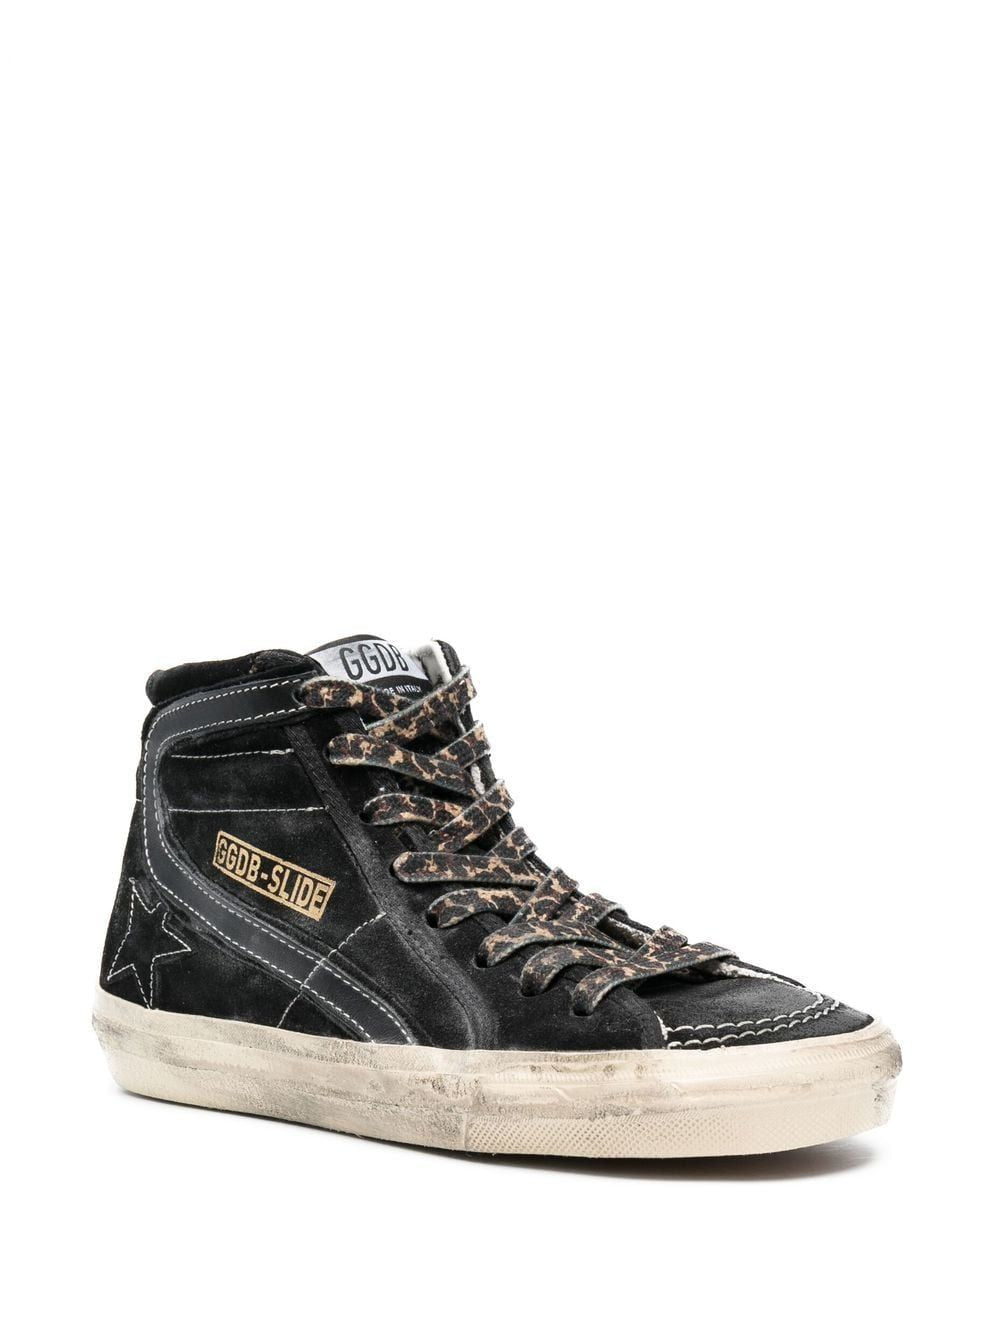 GOLDEN GOOSE Black and Shiny Leather Sneakers for Women - SS23 Collection